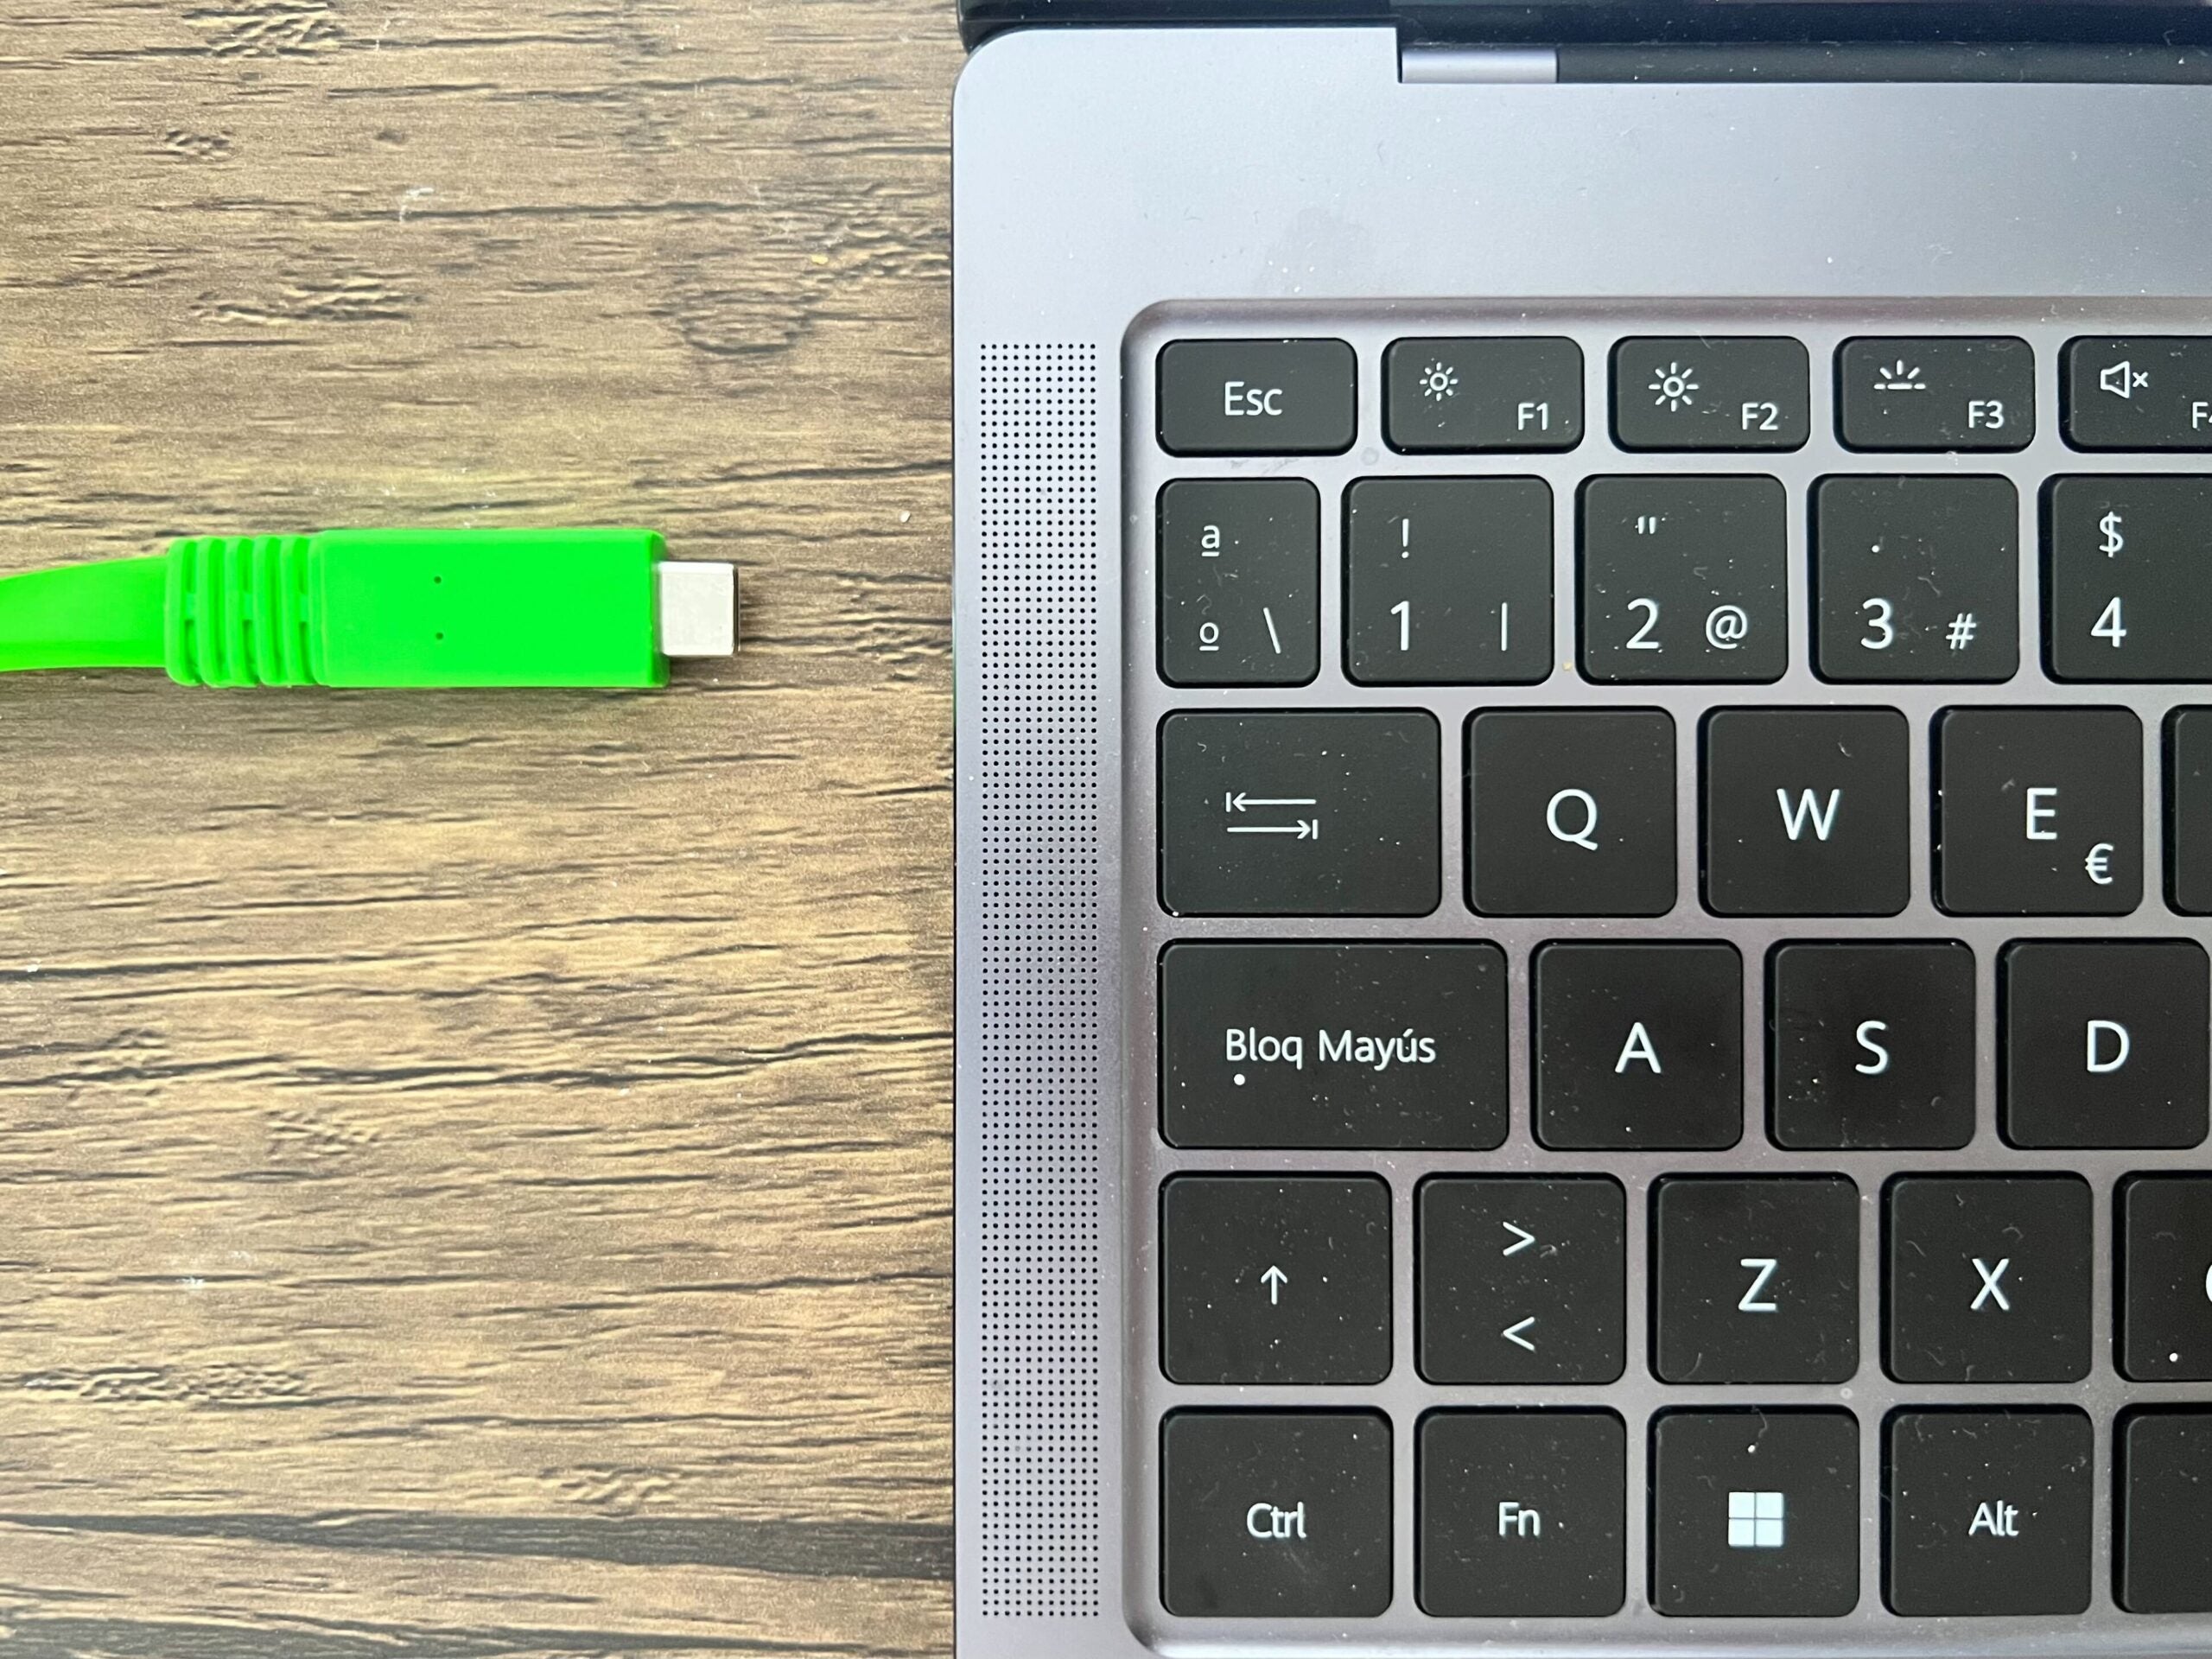 Connect the USB-C cable to your laptop to get started